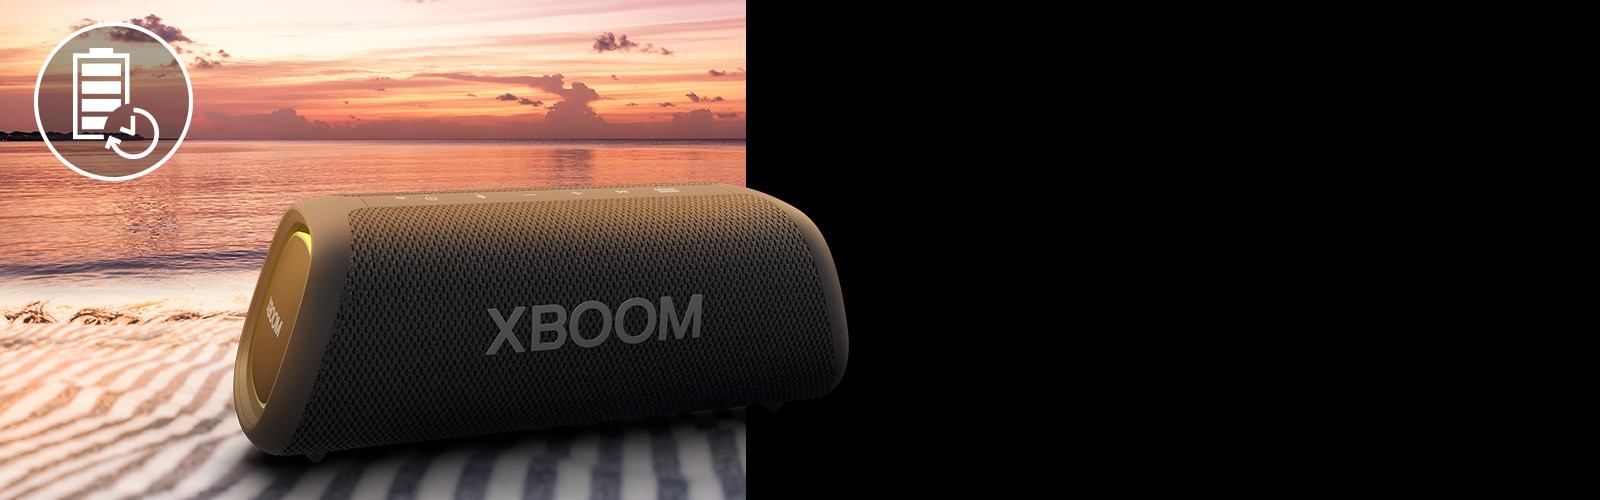 The speaker is placed on a beach towel. In front of the speaker, it shows sunset beach to illustrate that this speaker can be played up to 18 hours.